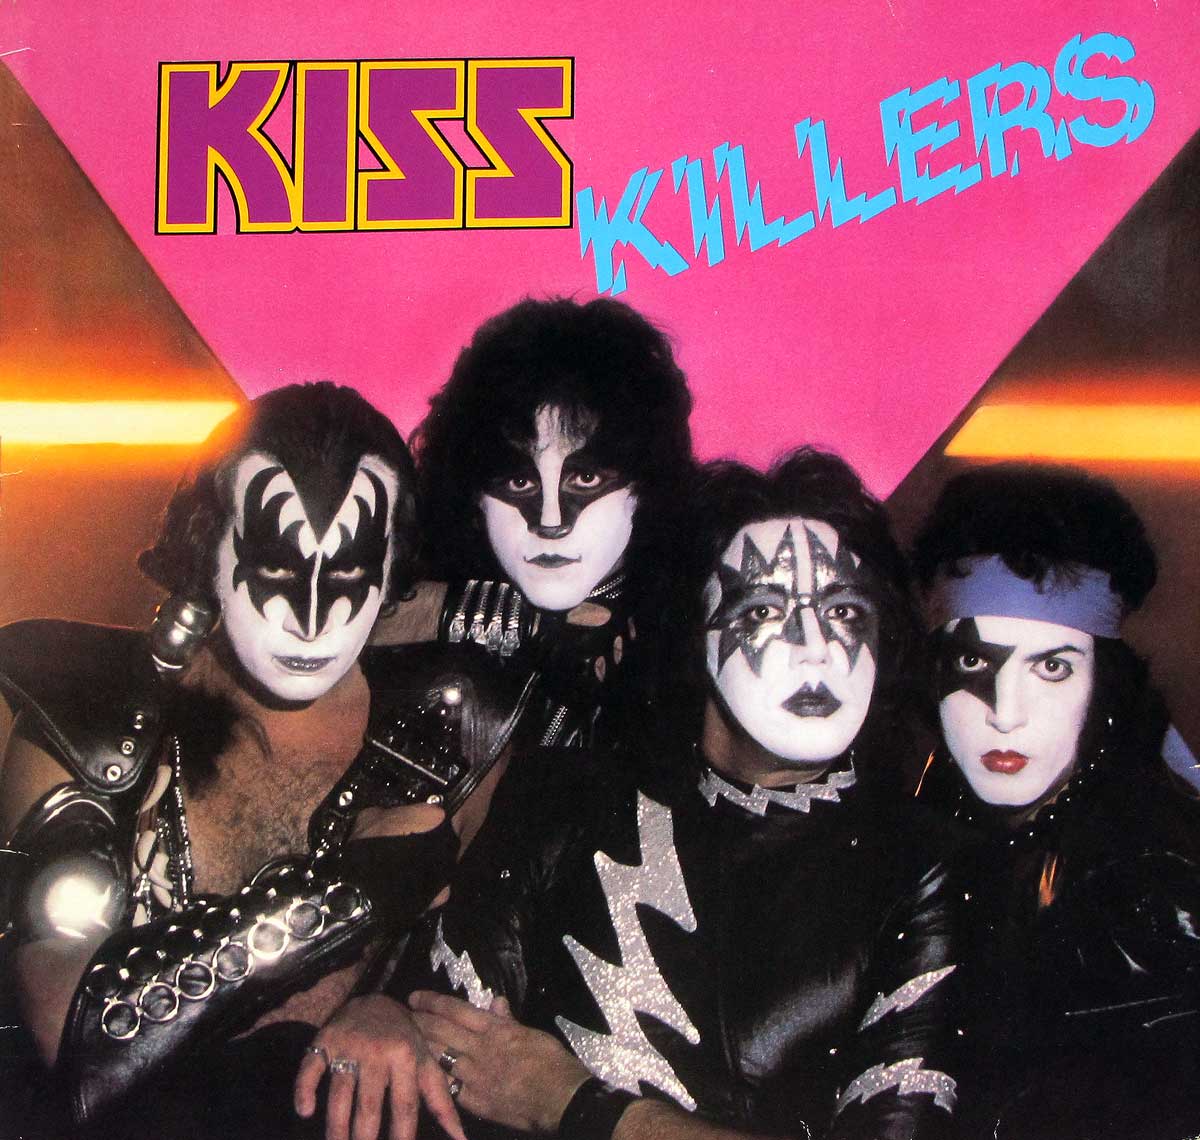 large album front cover photo of: Kiss Killers